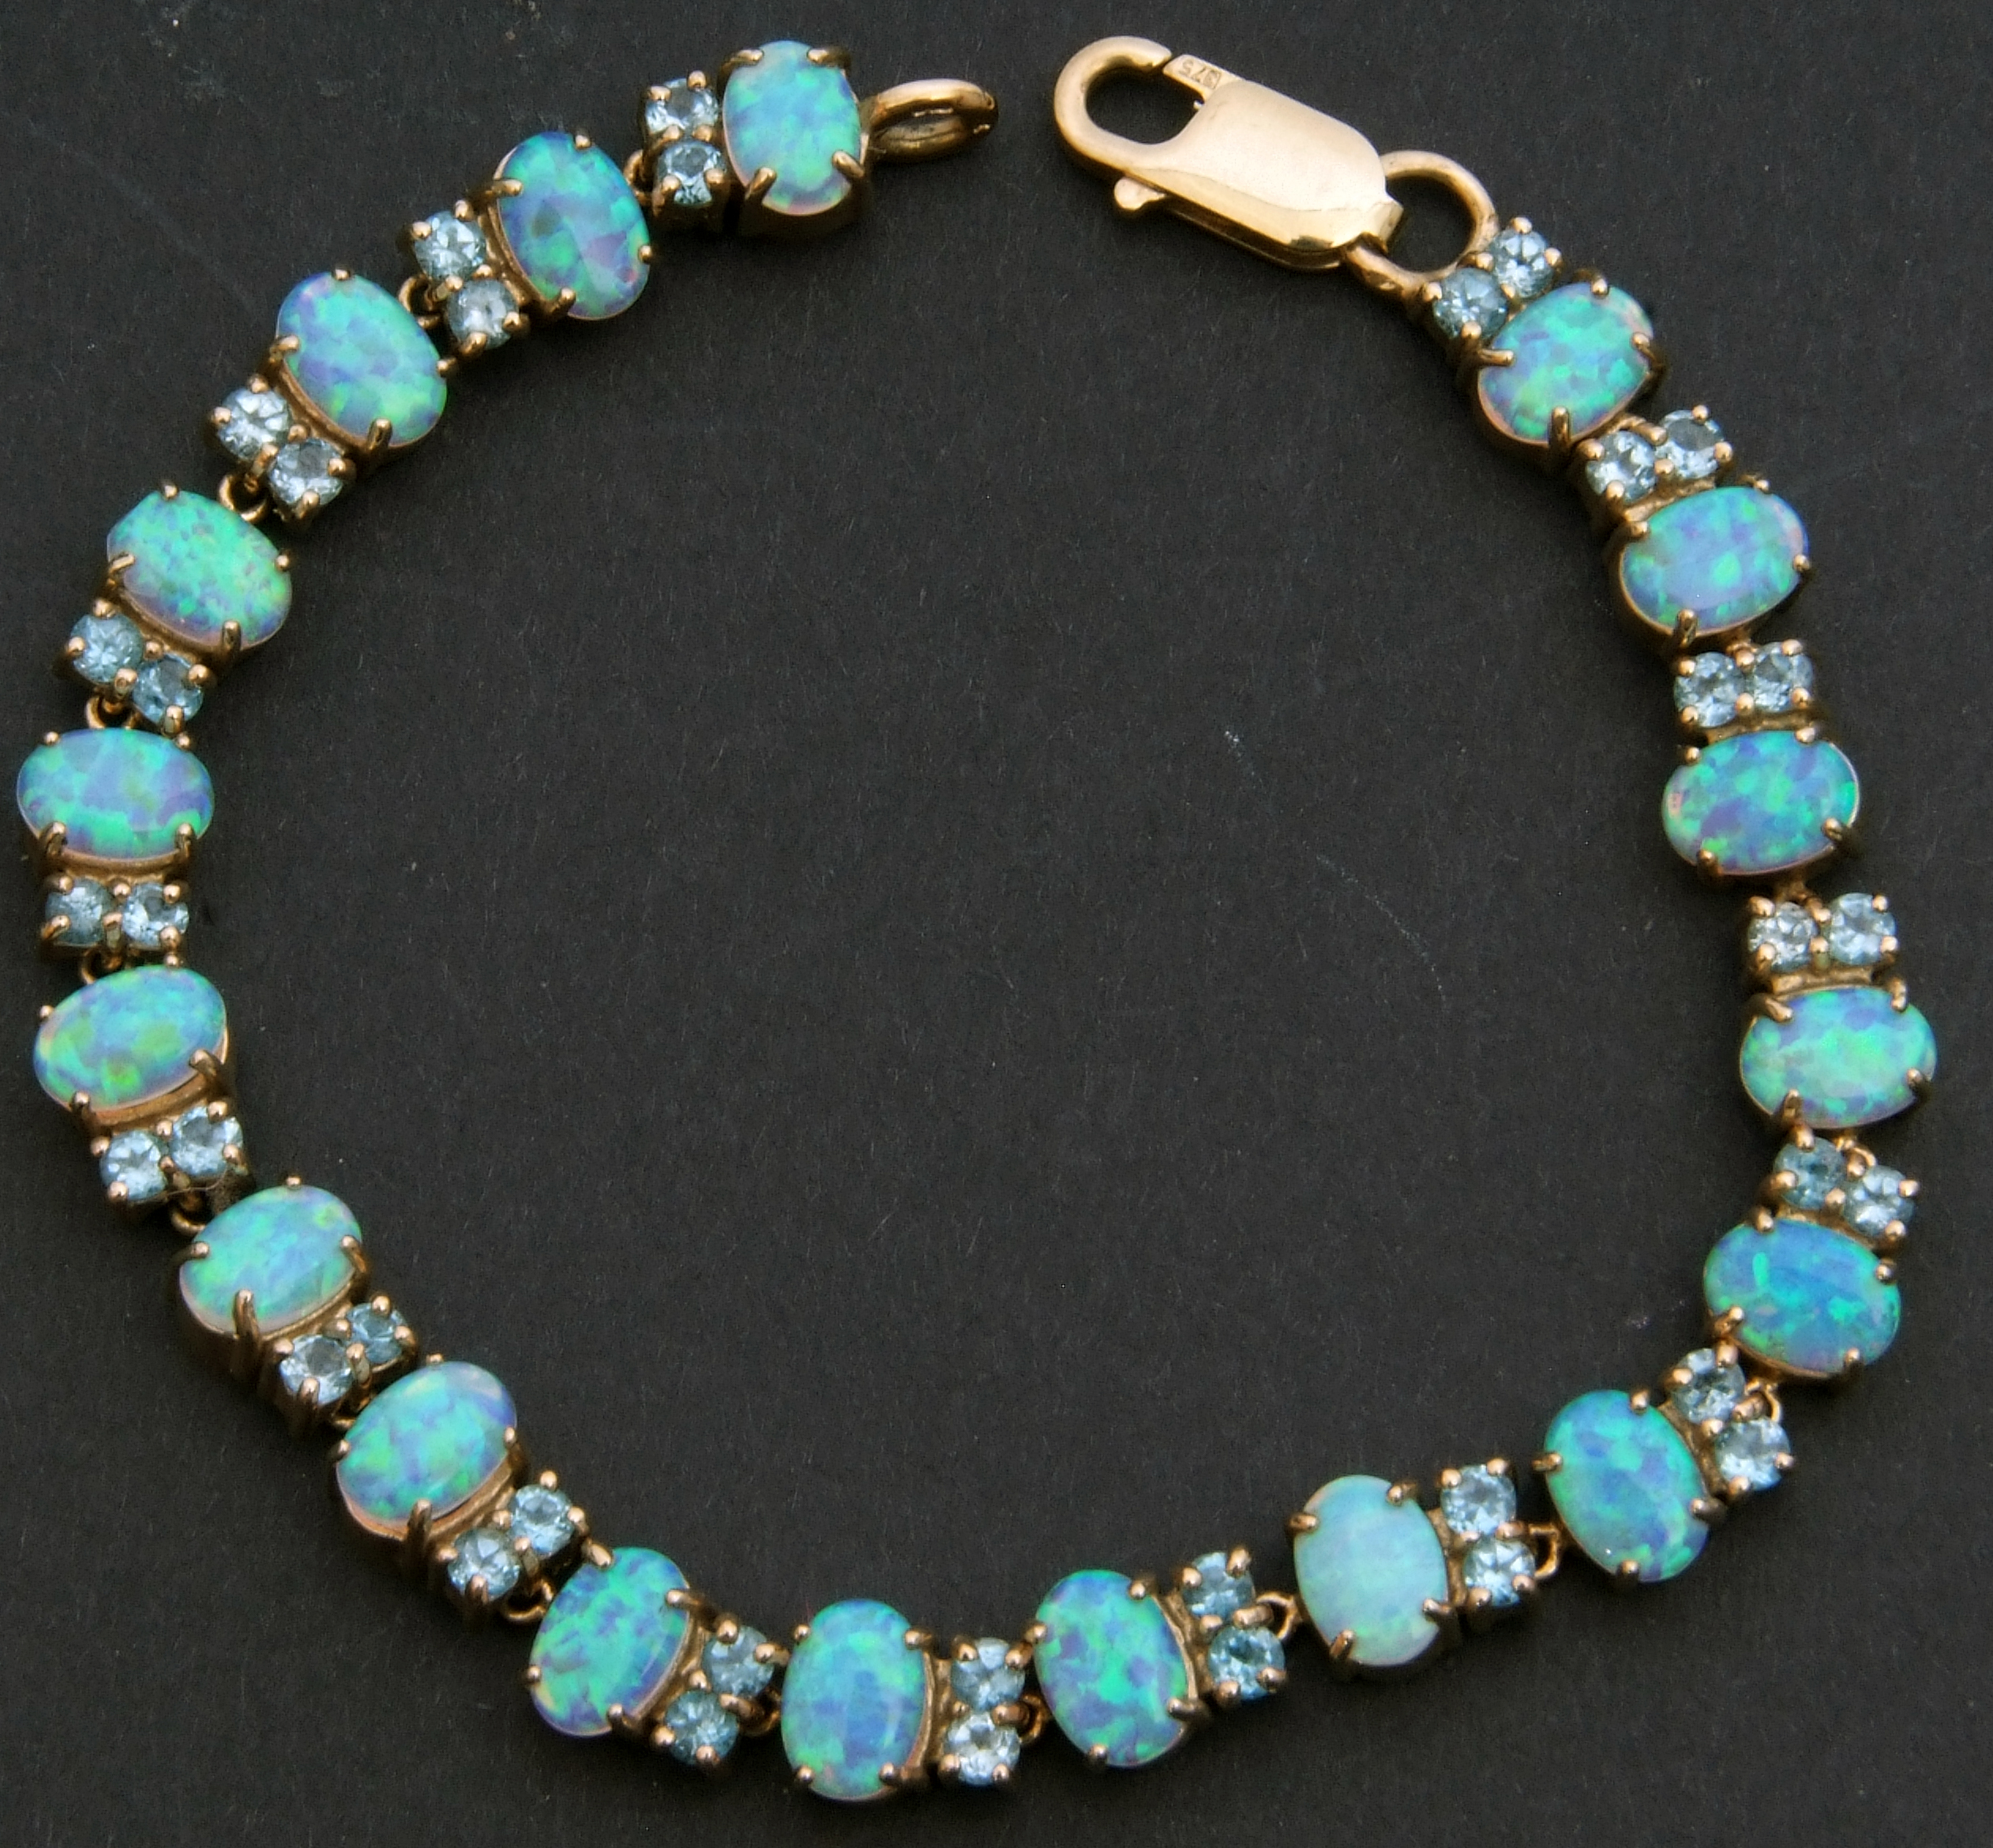 Modern 375 stamped opalescent and blue stone set articulated bracelet - Image 3 of 7